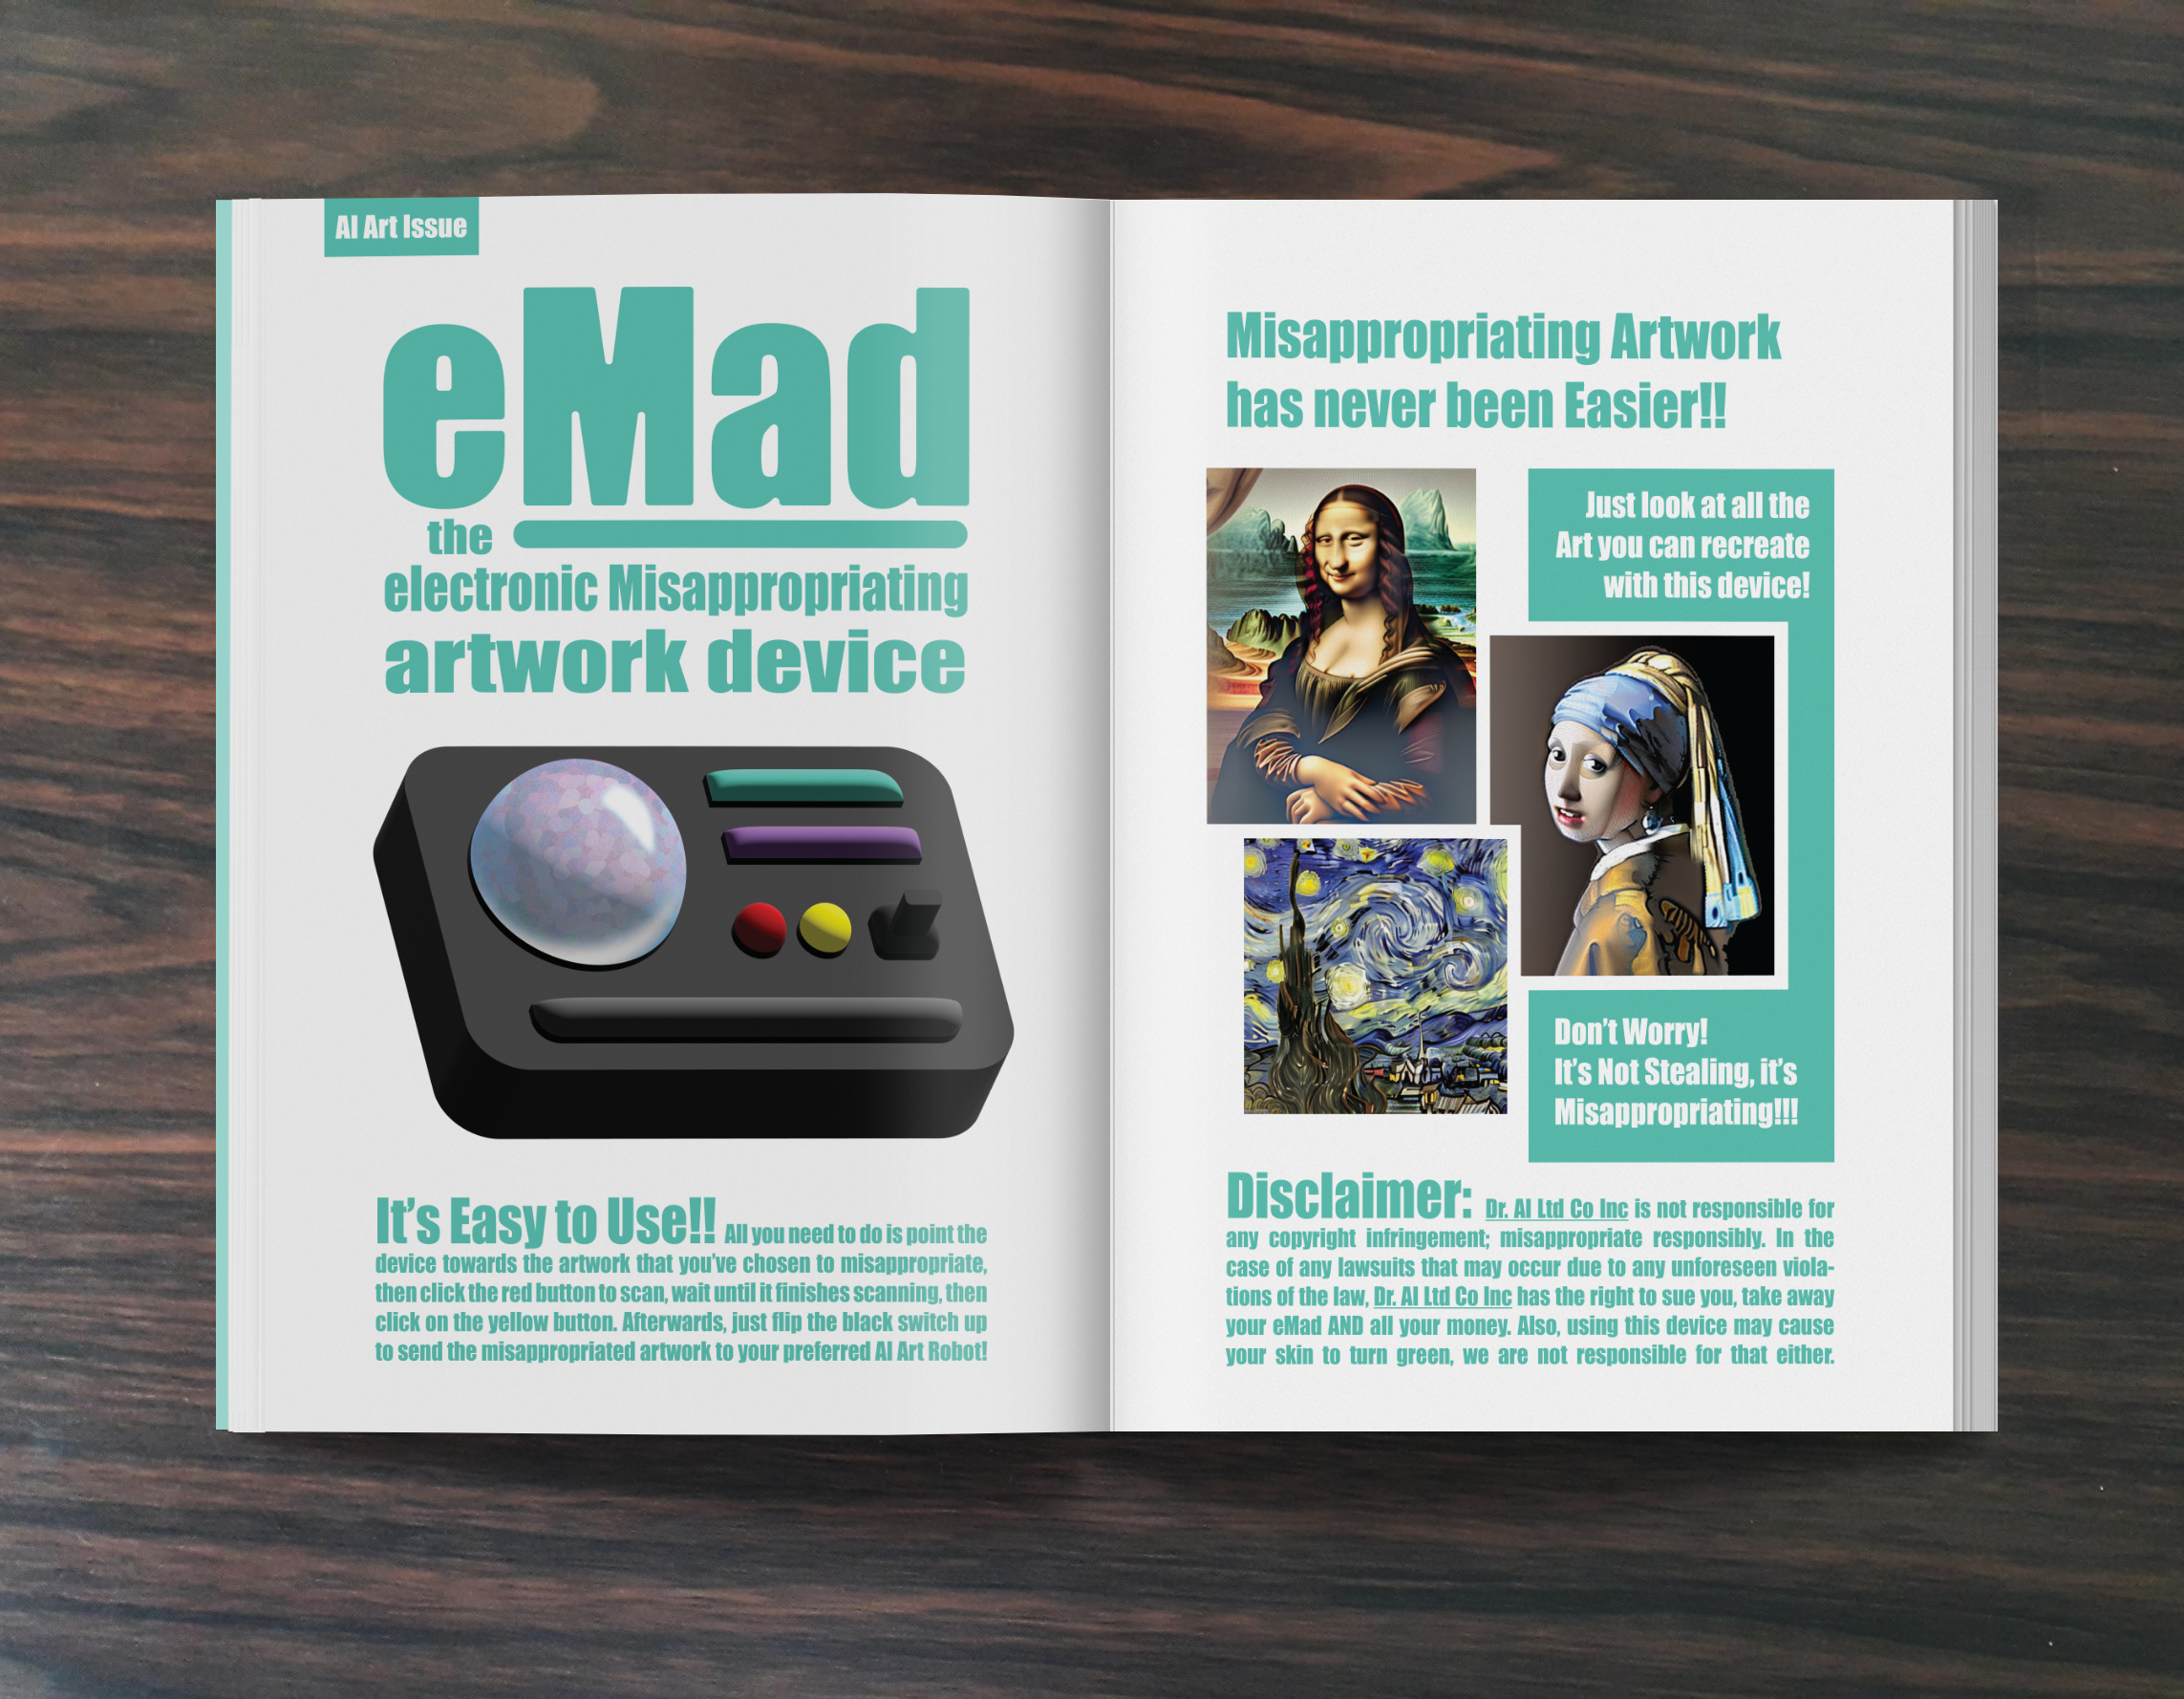 eMad: the electronic Misappropriating artwork device